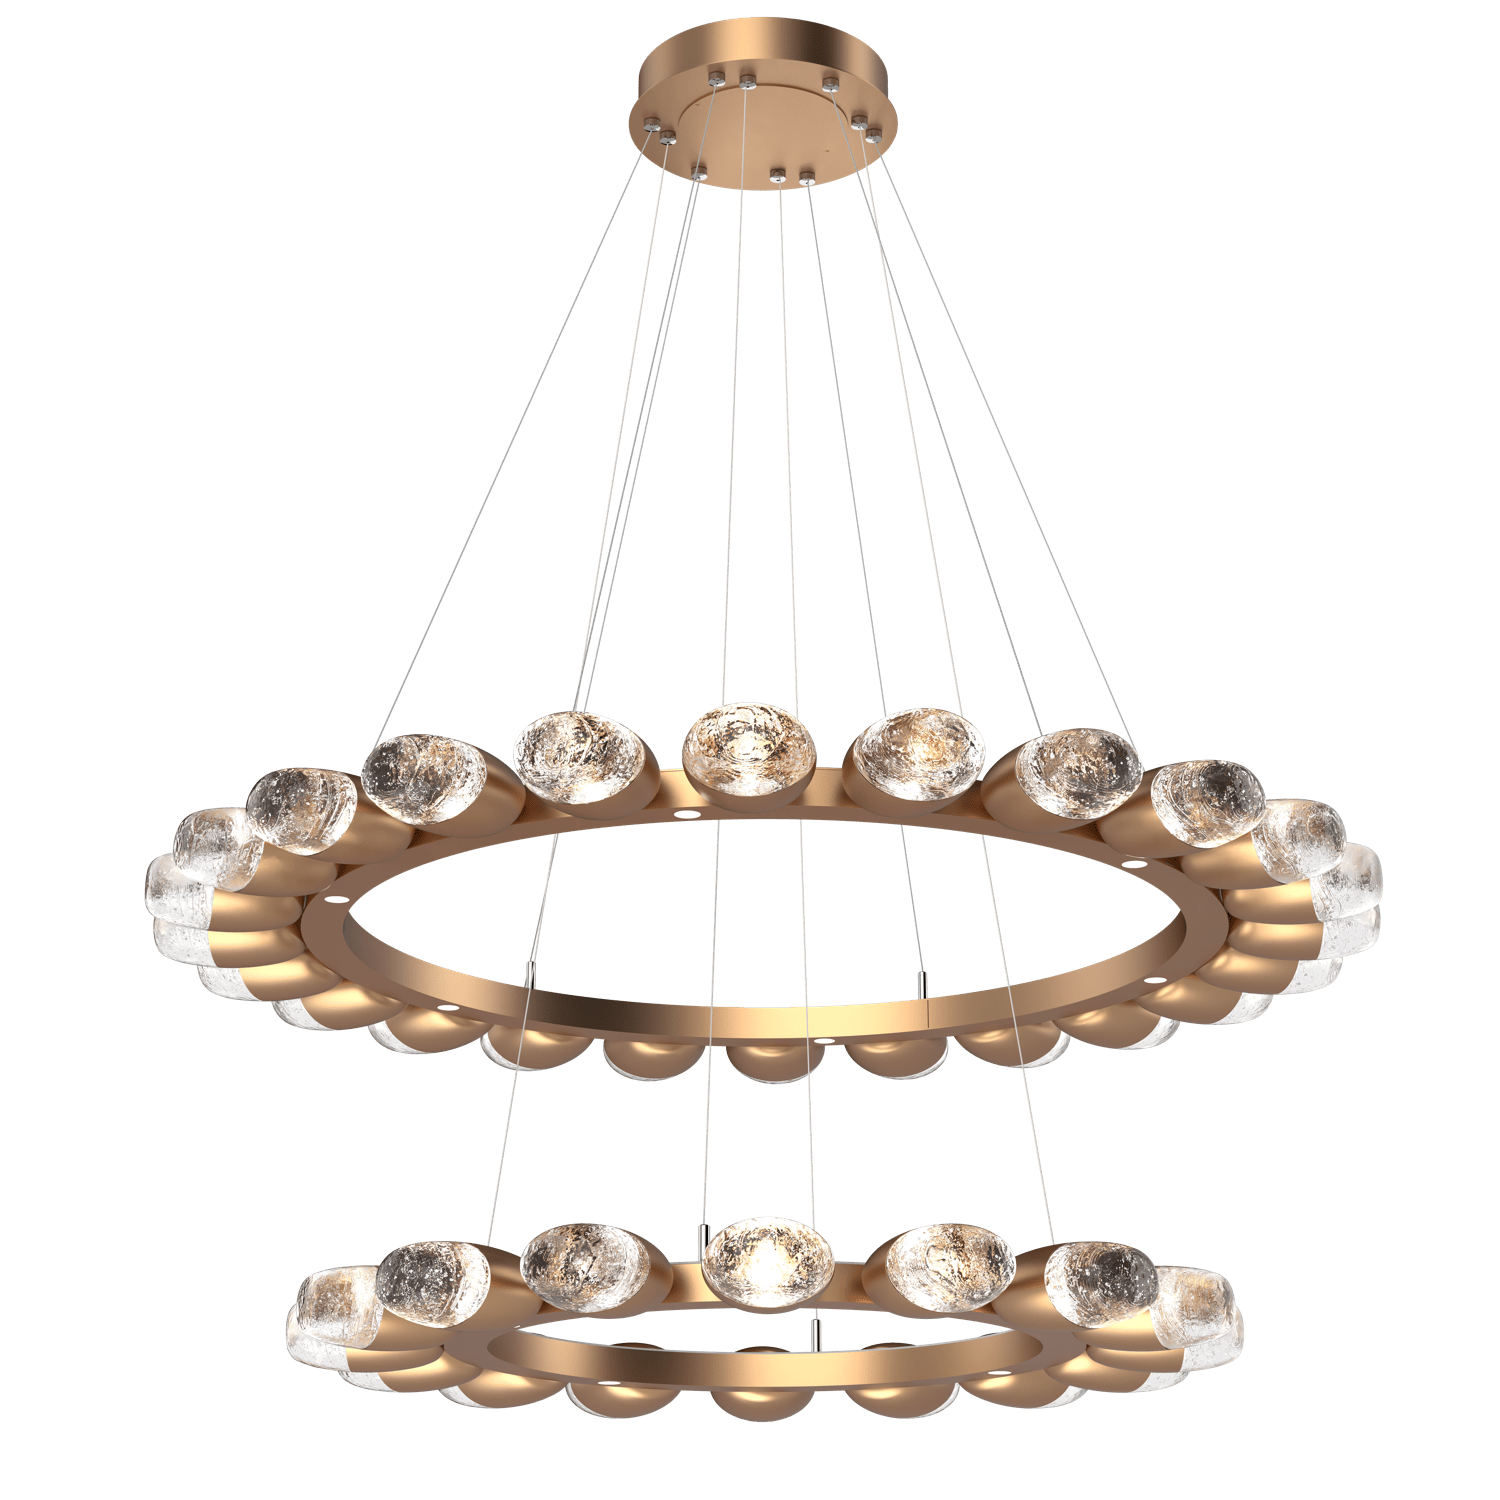 CHB0079-2T-NB-Hammerton-Studio-Pebble-48-inch-two-tier-radial-ring-chandelier-with-novel-brass-finish-and-clear-cast-glass-shades-and-LED-lamping